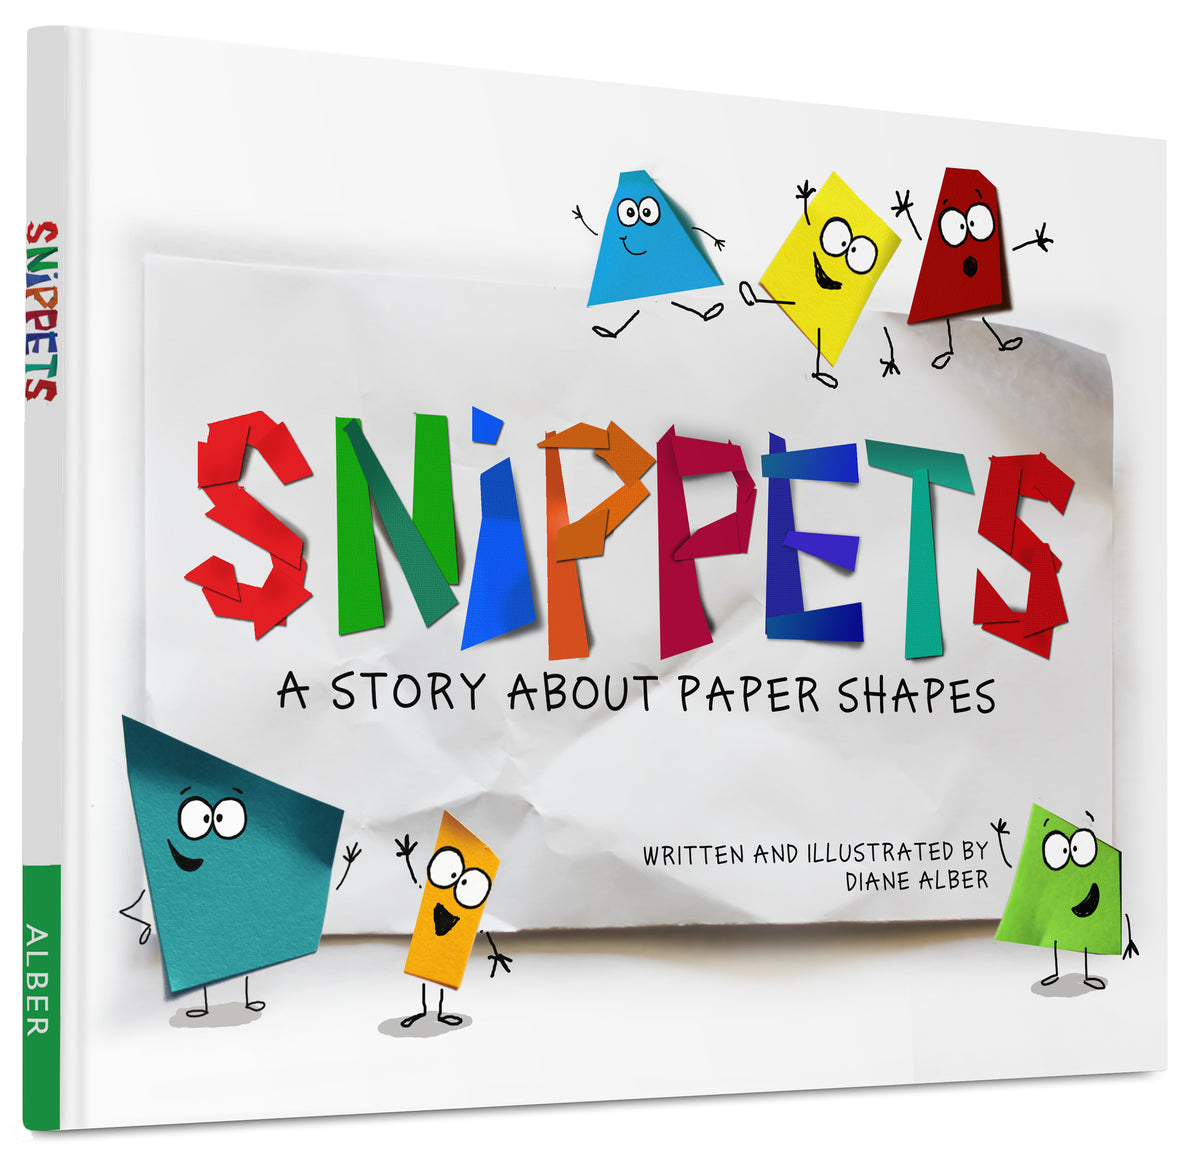 Book snippets online